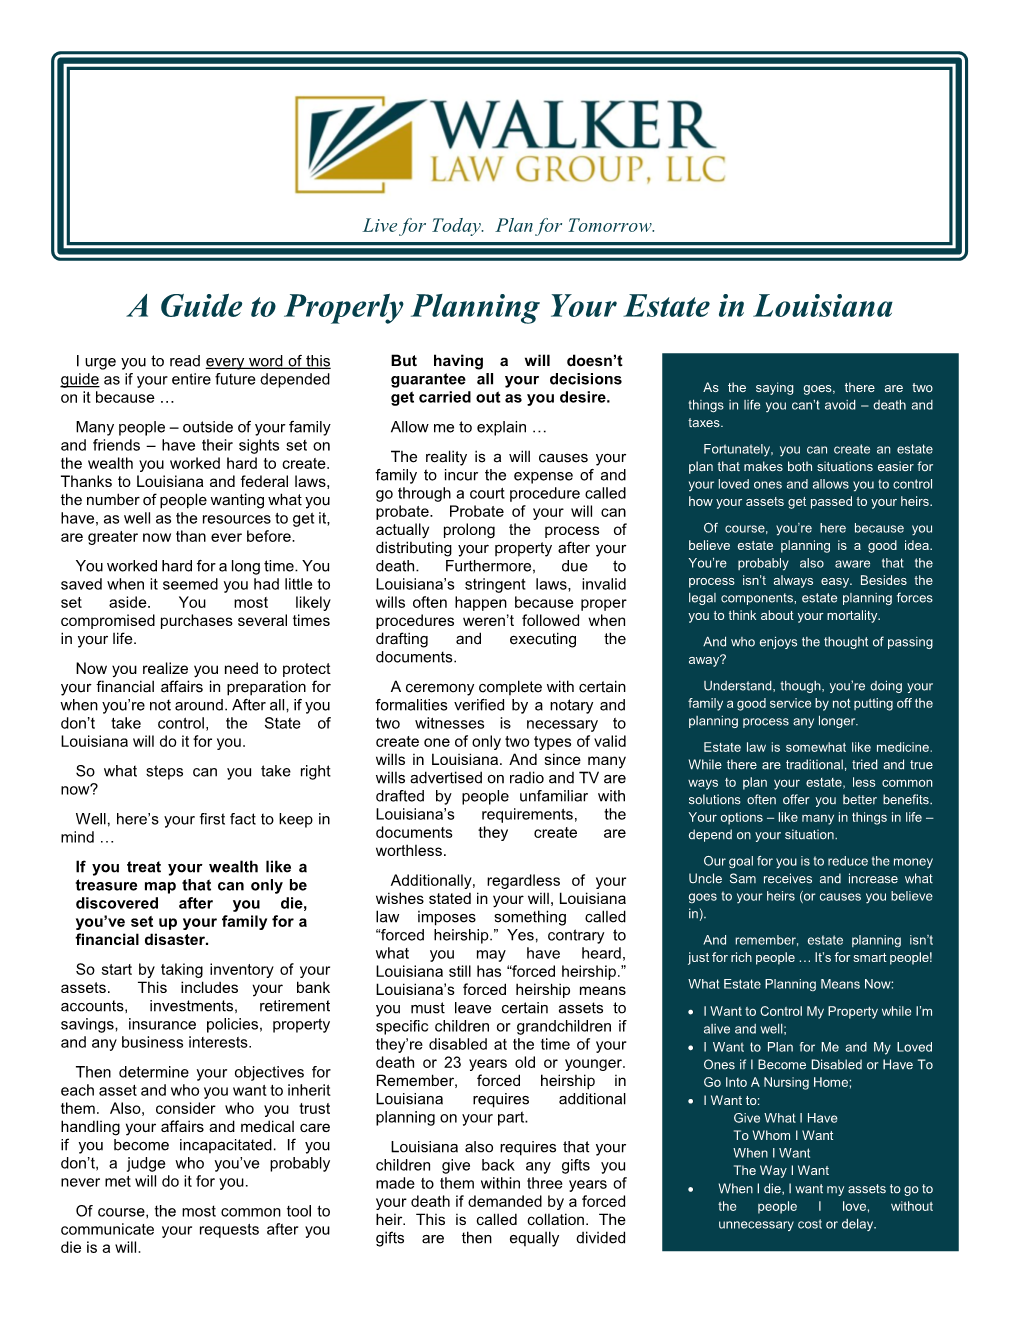 A Guide to Properly Planning Your Estate in Louisiana